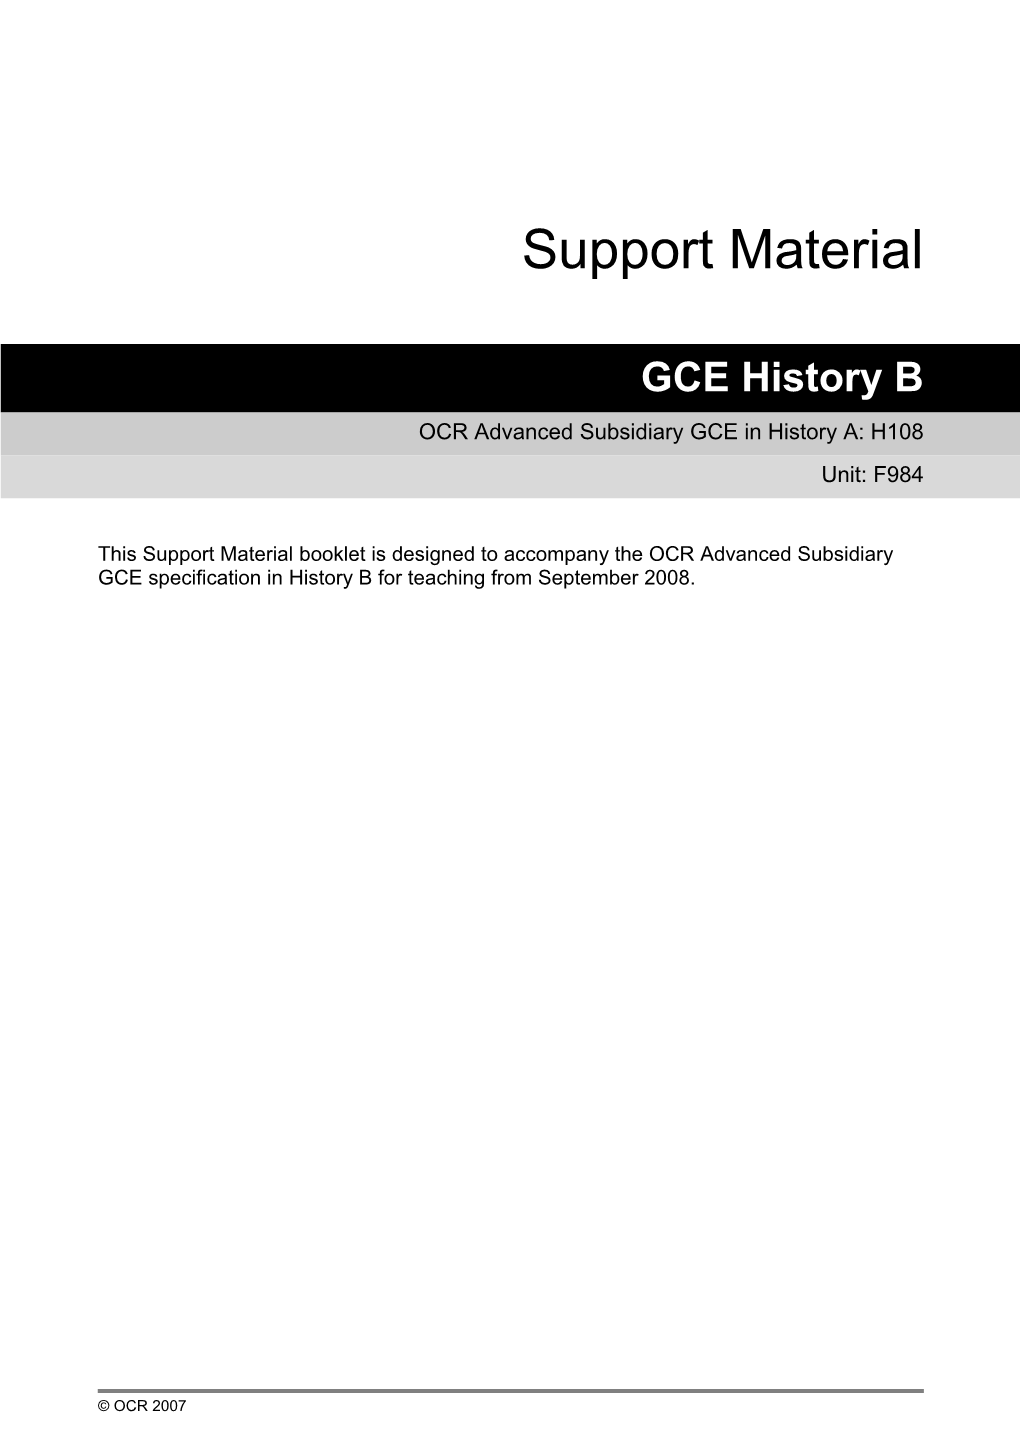 OCR Advanced Subsidiary GCE in History A: H108